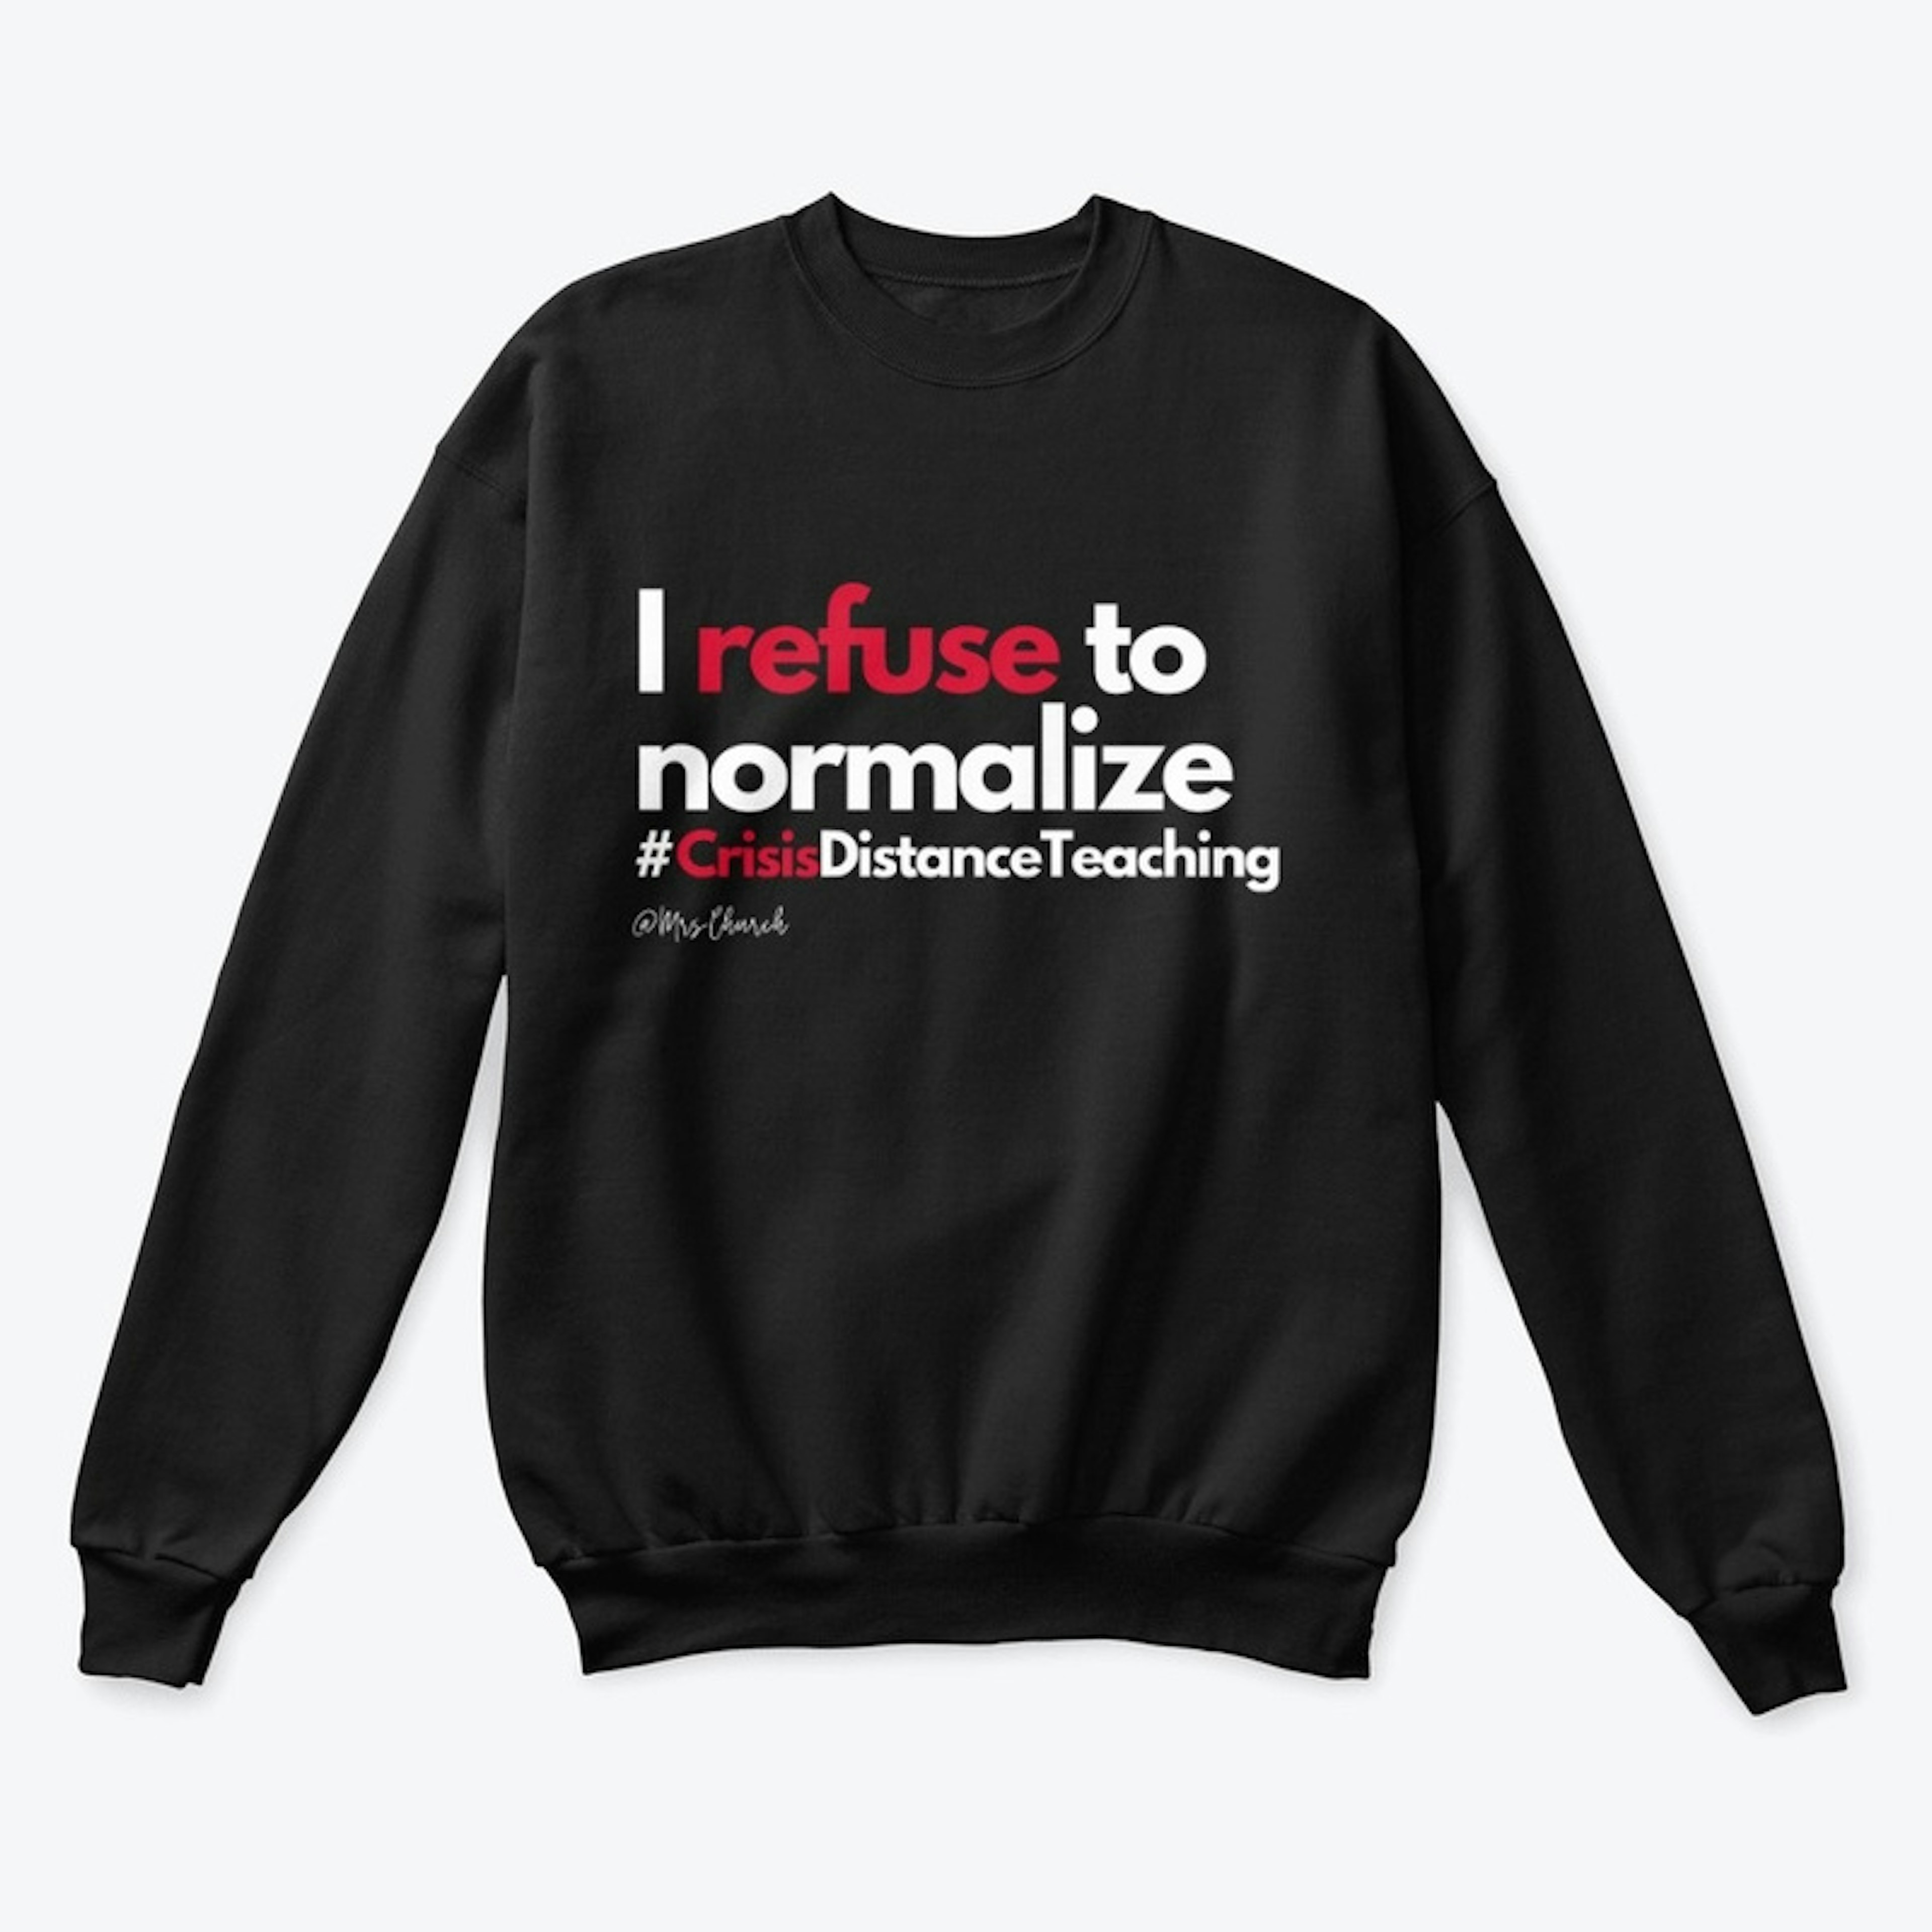 I refuse to normalize this - Crew Neck